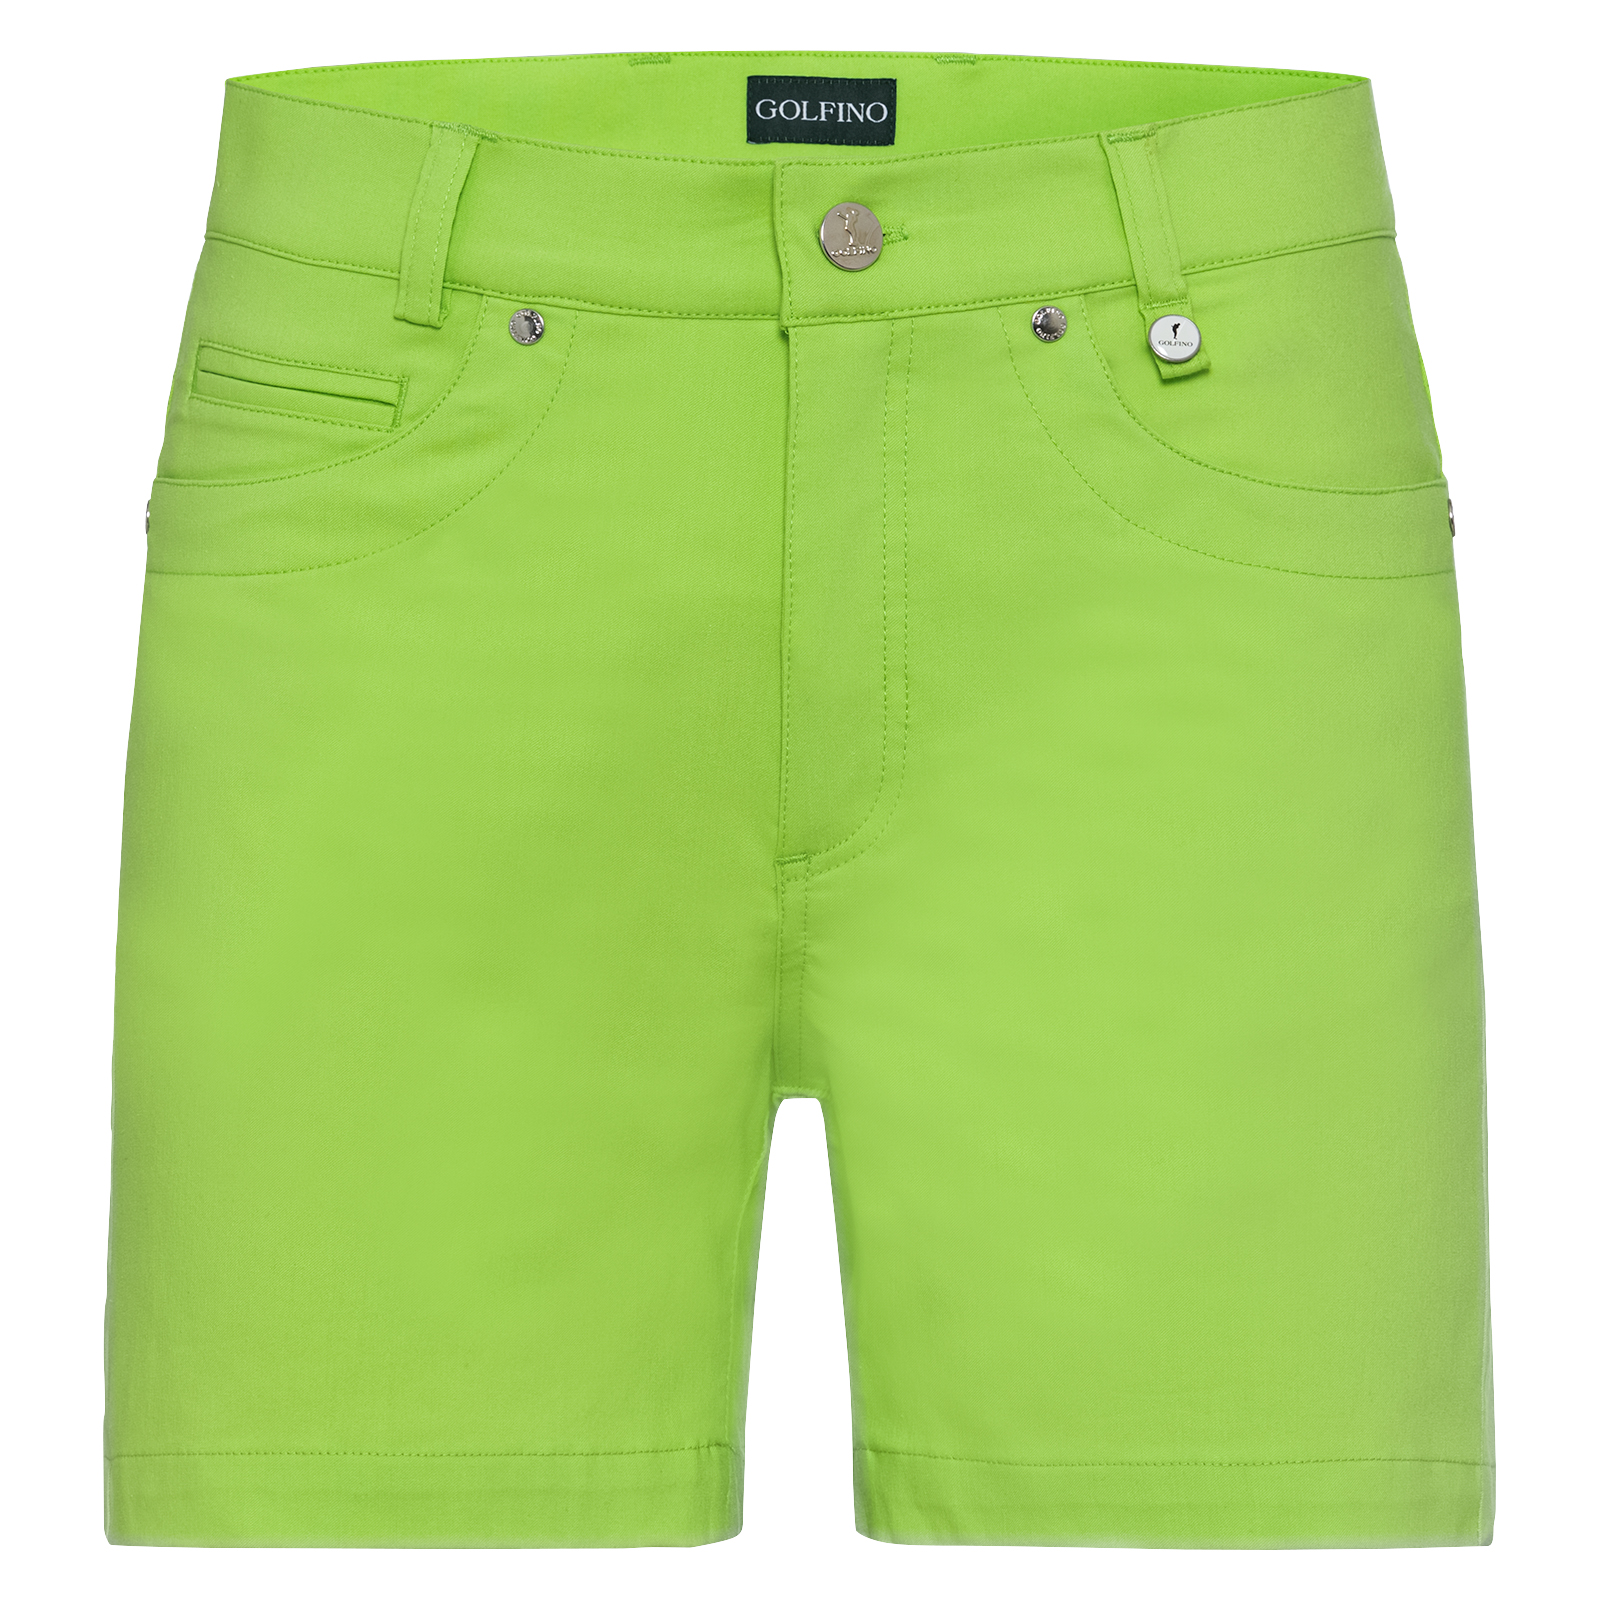 Ladies' pro-style golf shorts with sun protection 